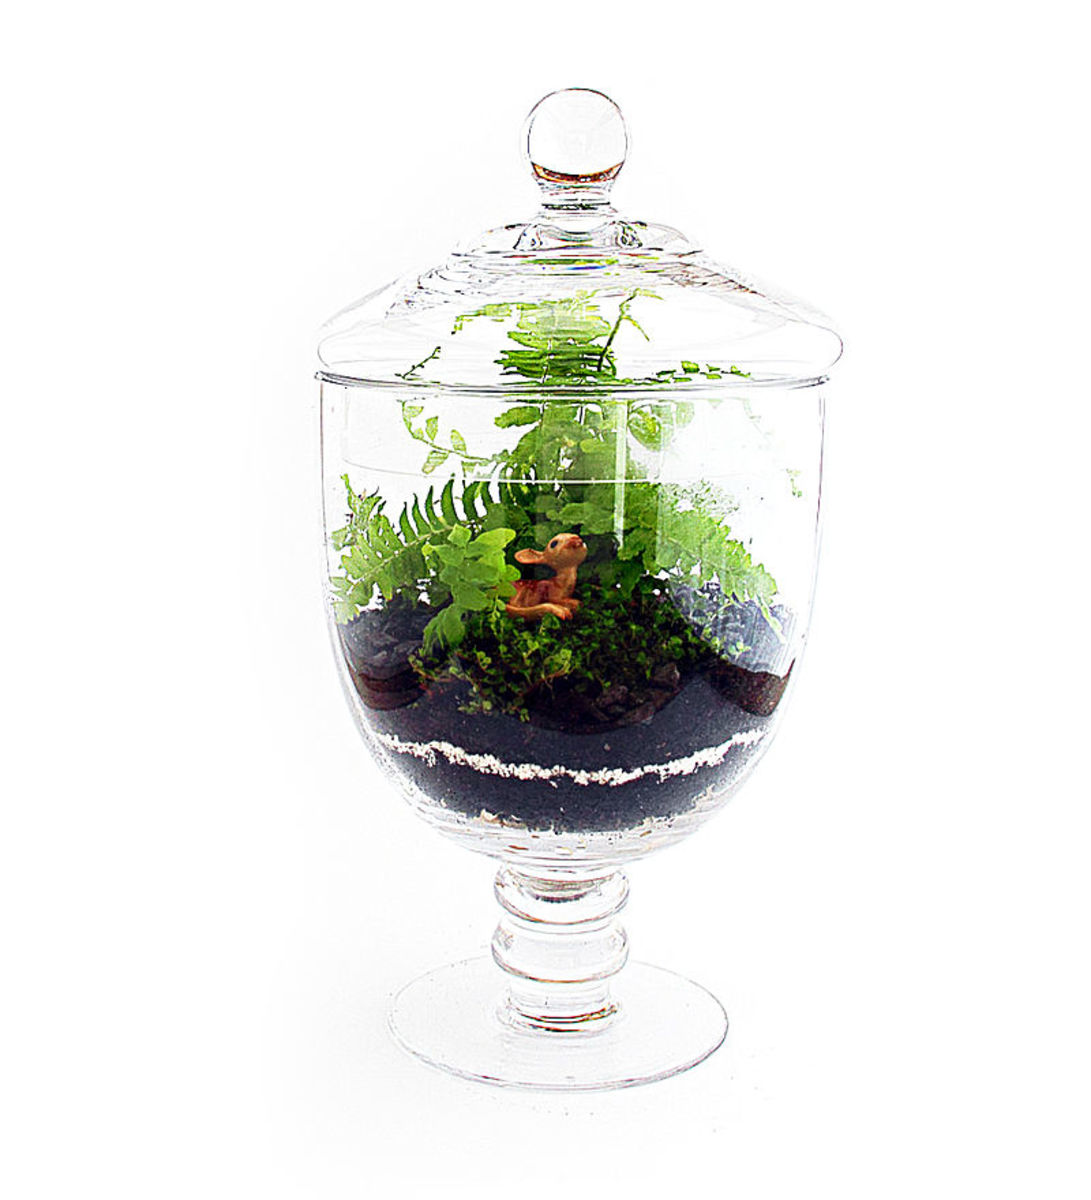 Friendship plants are often grown in terrariums because of their high humidity levels.